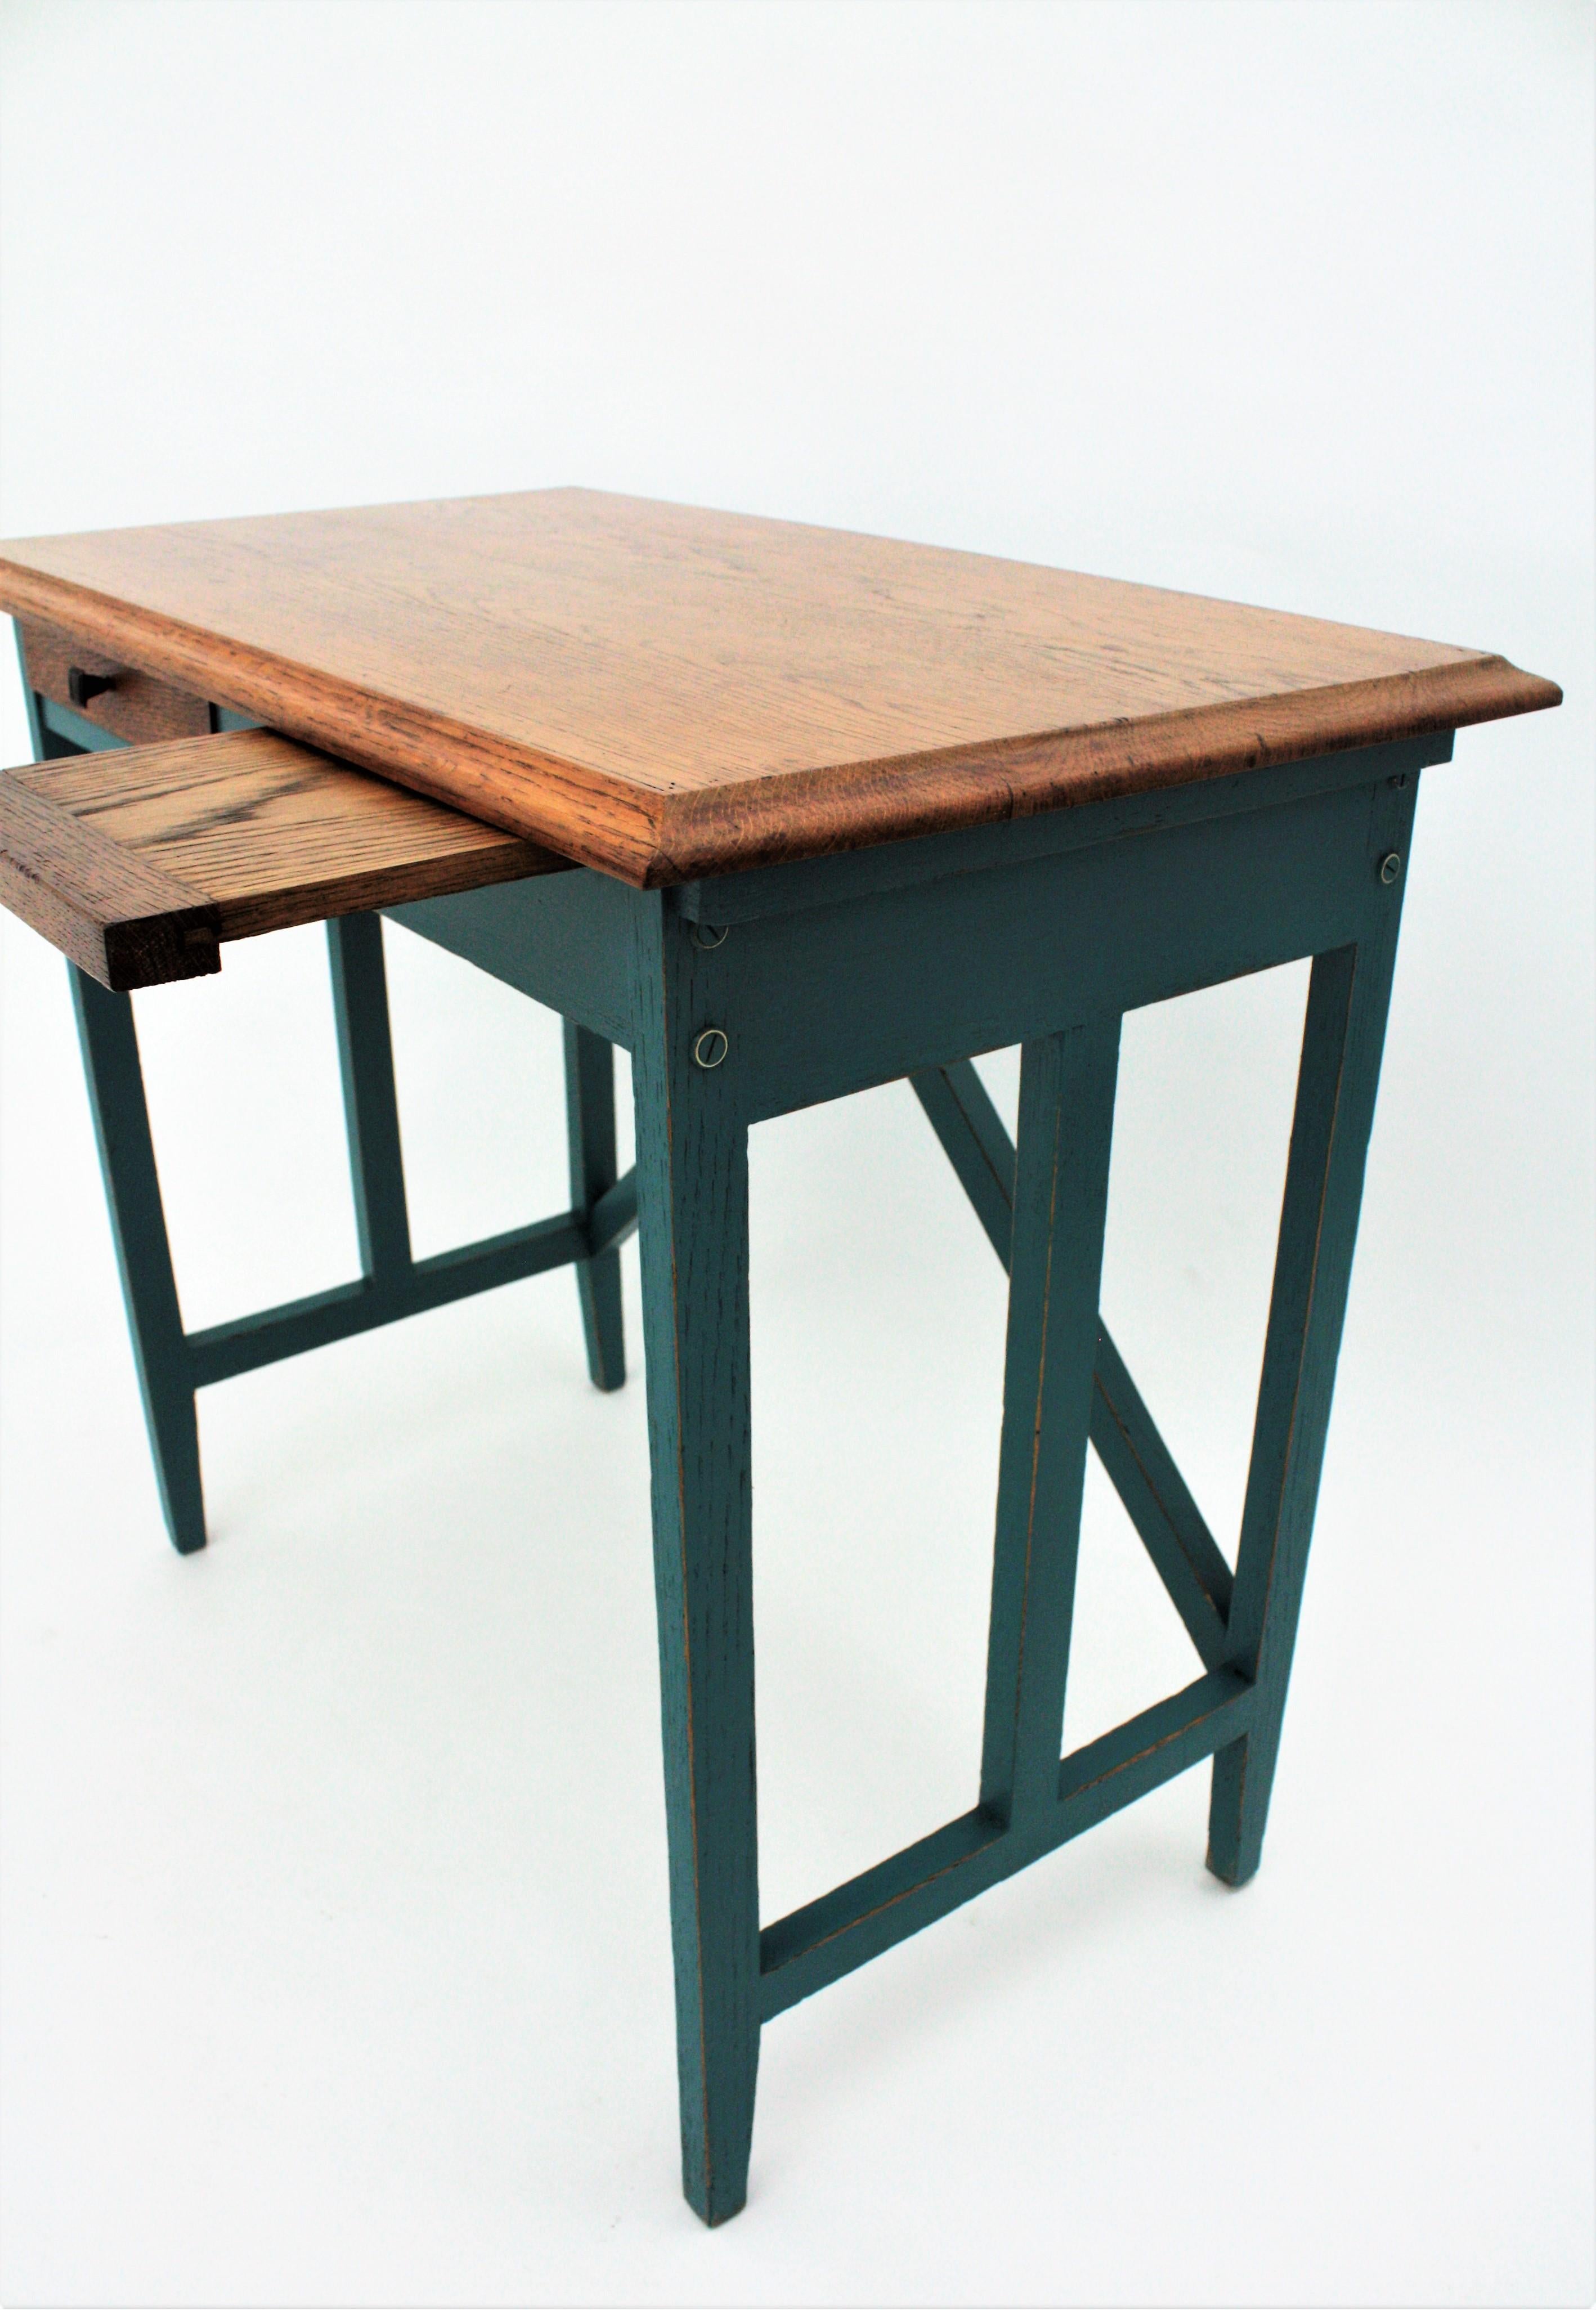 Spanish Desk and Stool in Oak with Green Blue Patina, 1930s For Sale 5